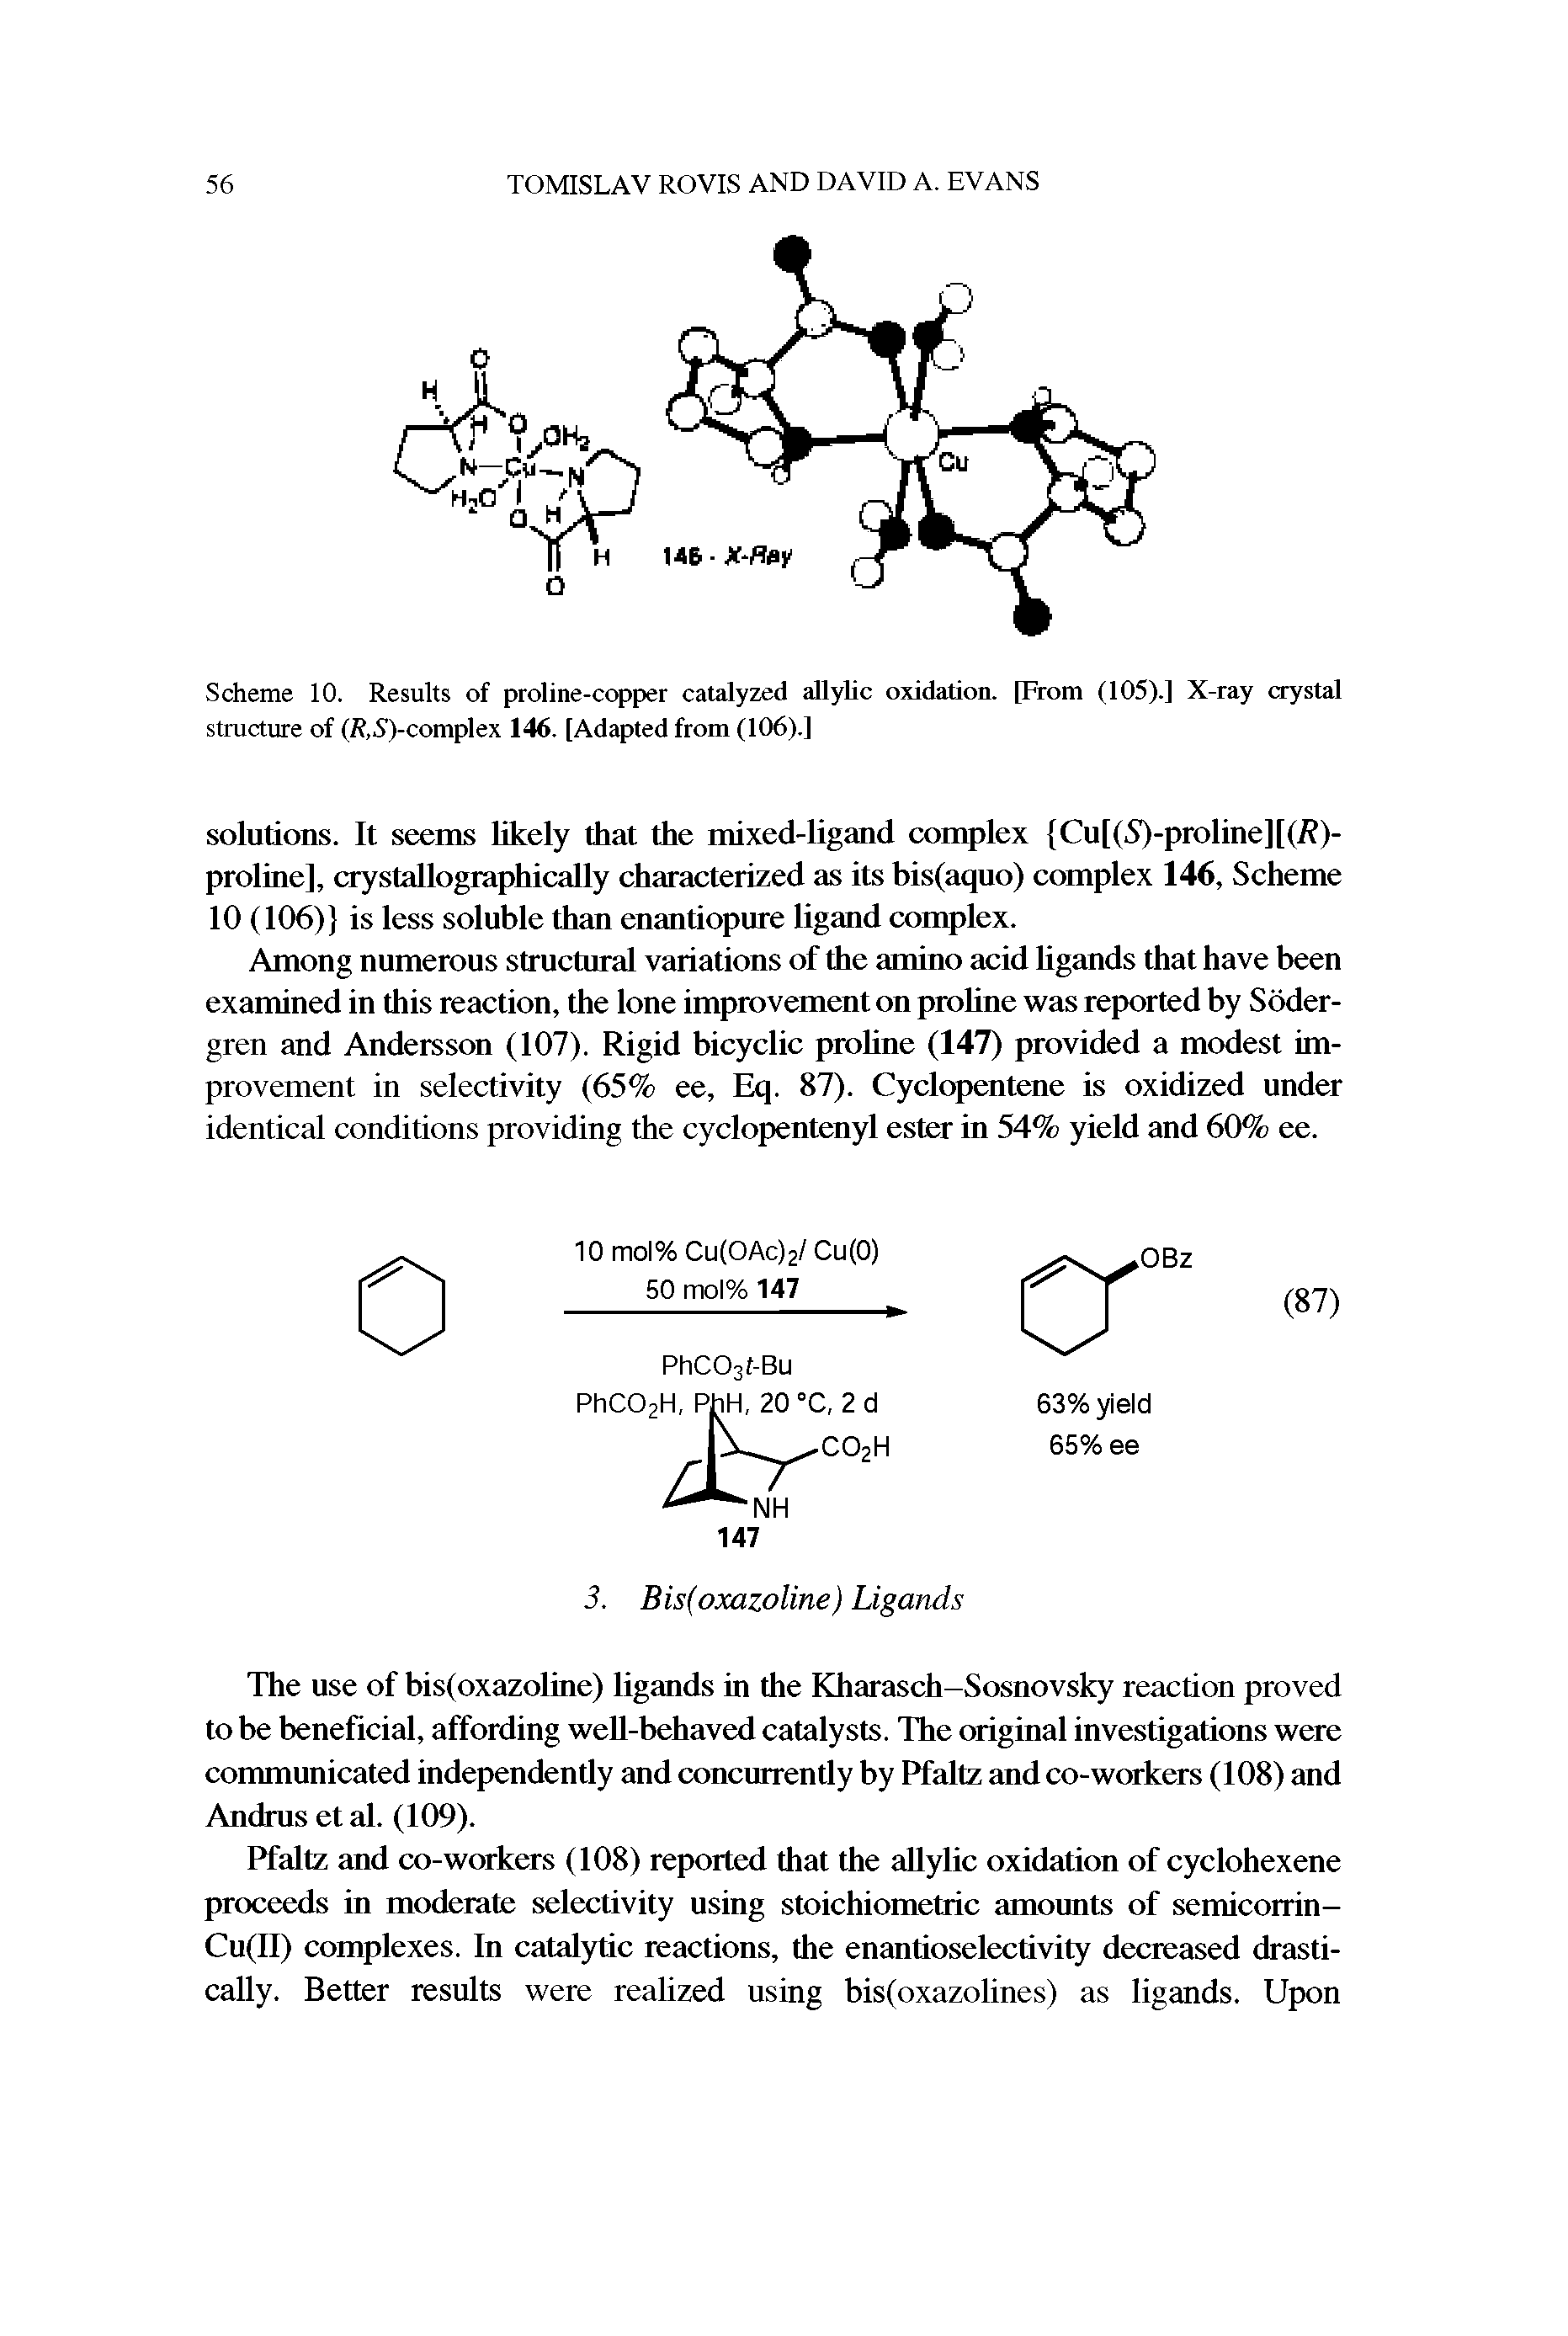 Scheme 10. Results of proline-copper catalyzed allylic oxidation, prom (105).] X-ray crystal structure of (R.Sf-complex 146. [Adapted from (106).]...